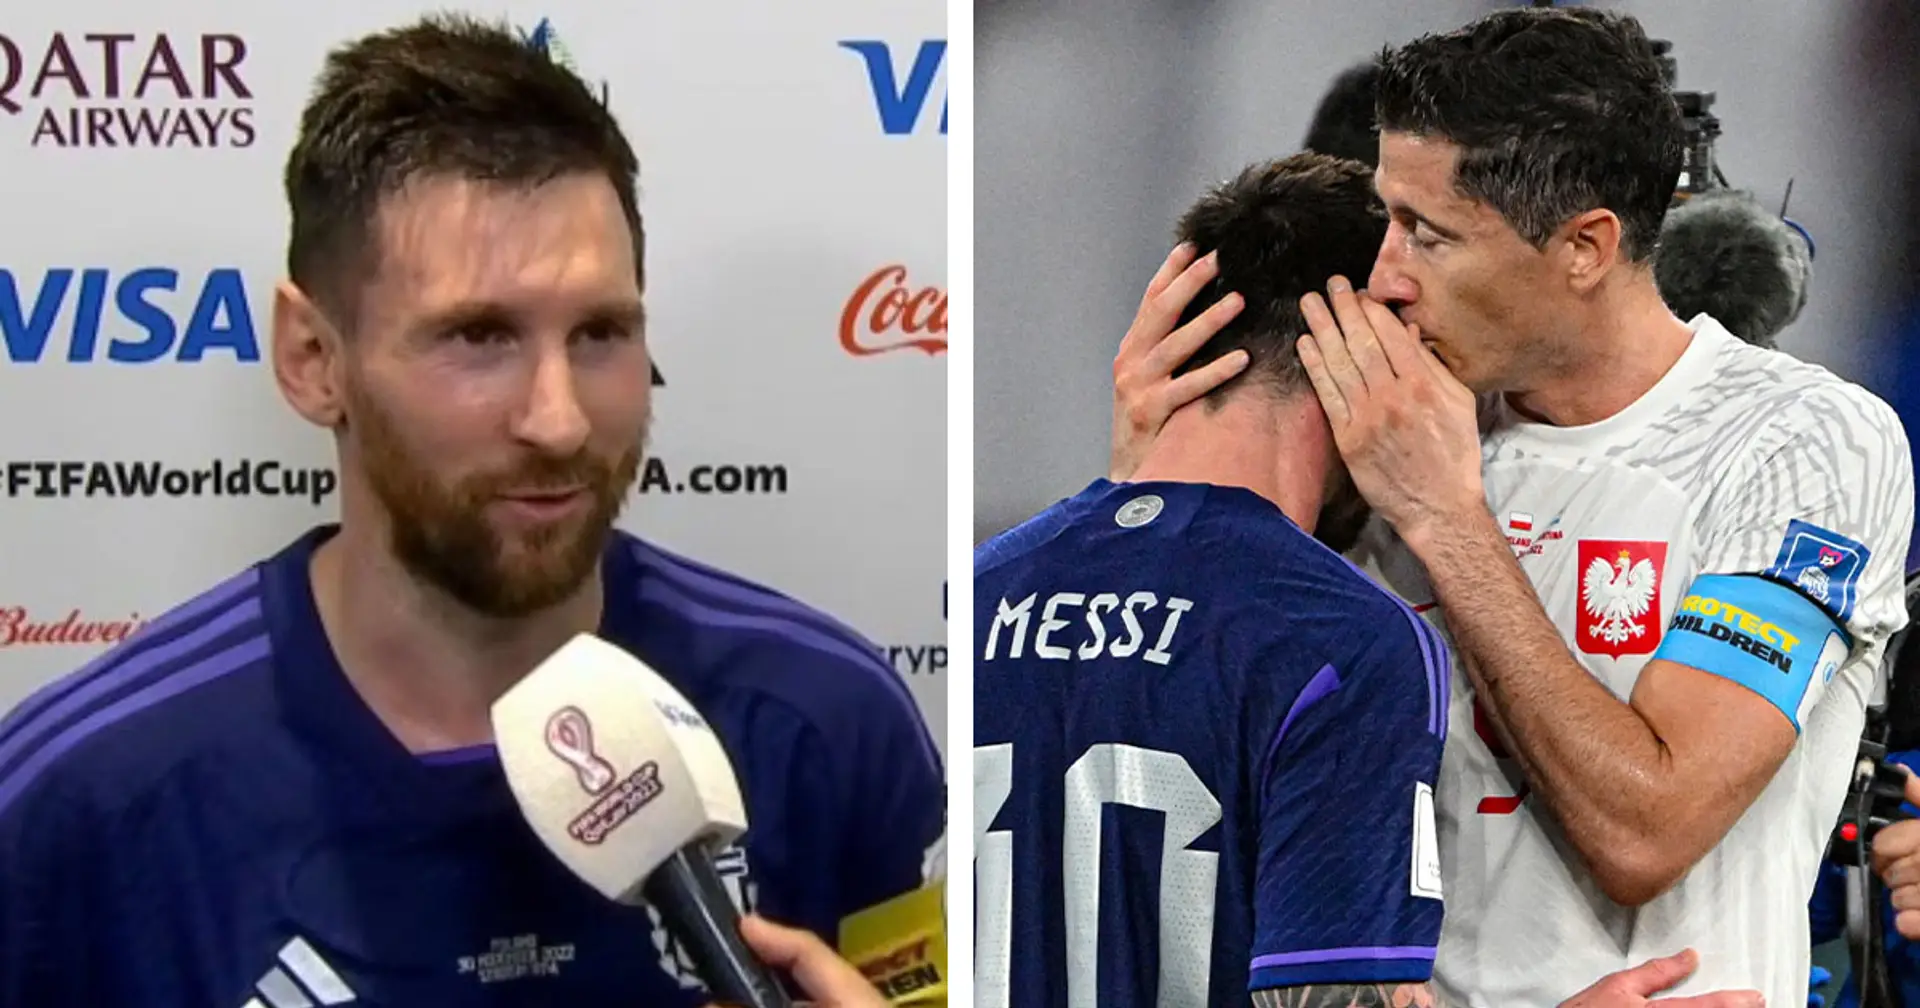 Messi gives clever response to being asked about post-match chat with Lewandowski